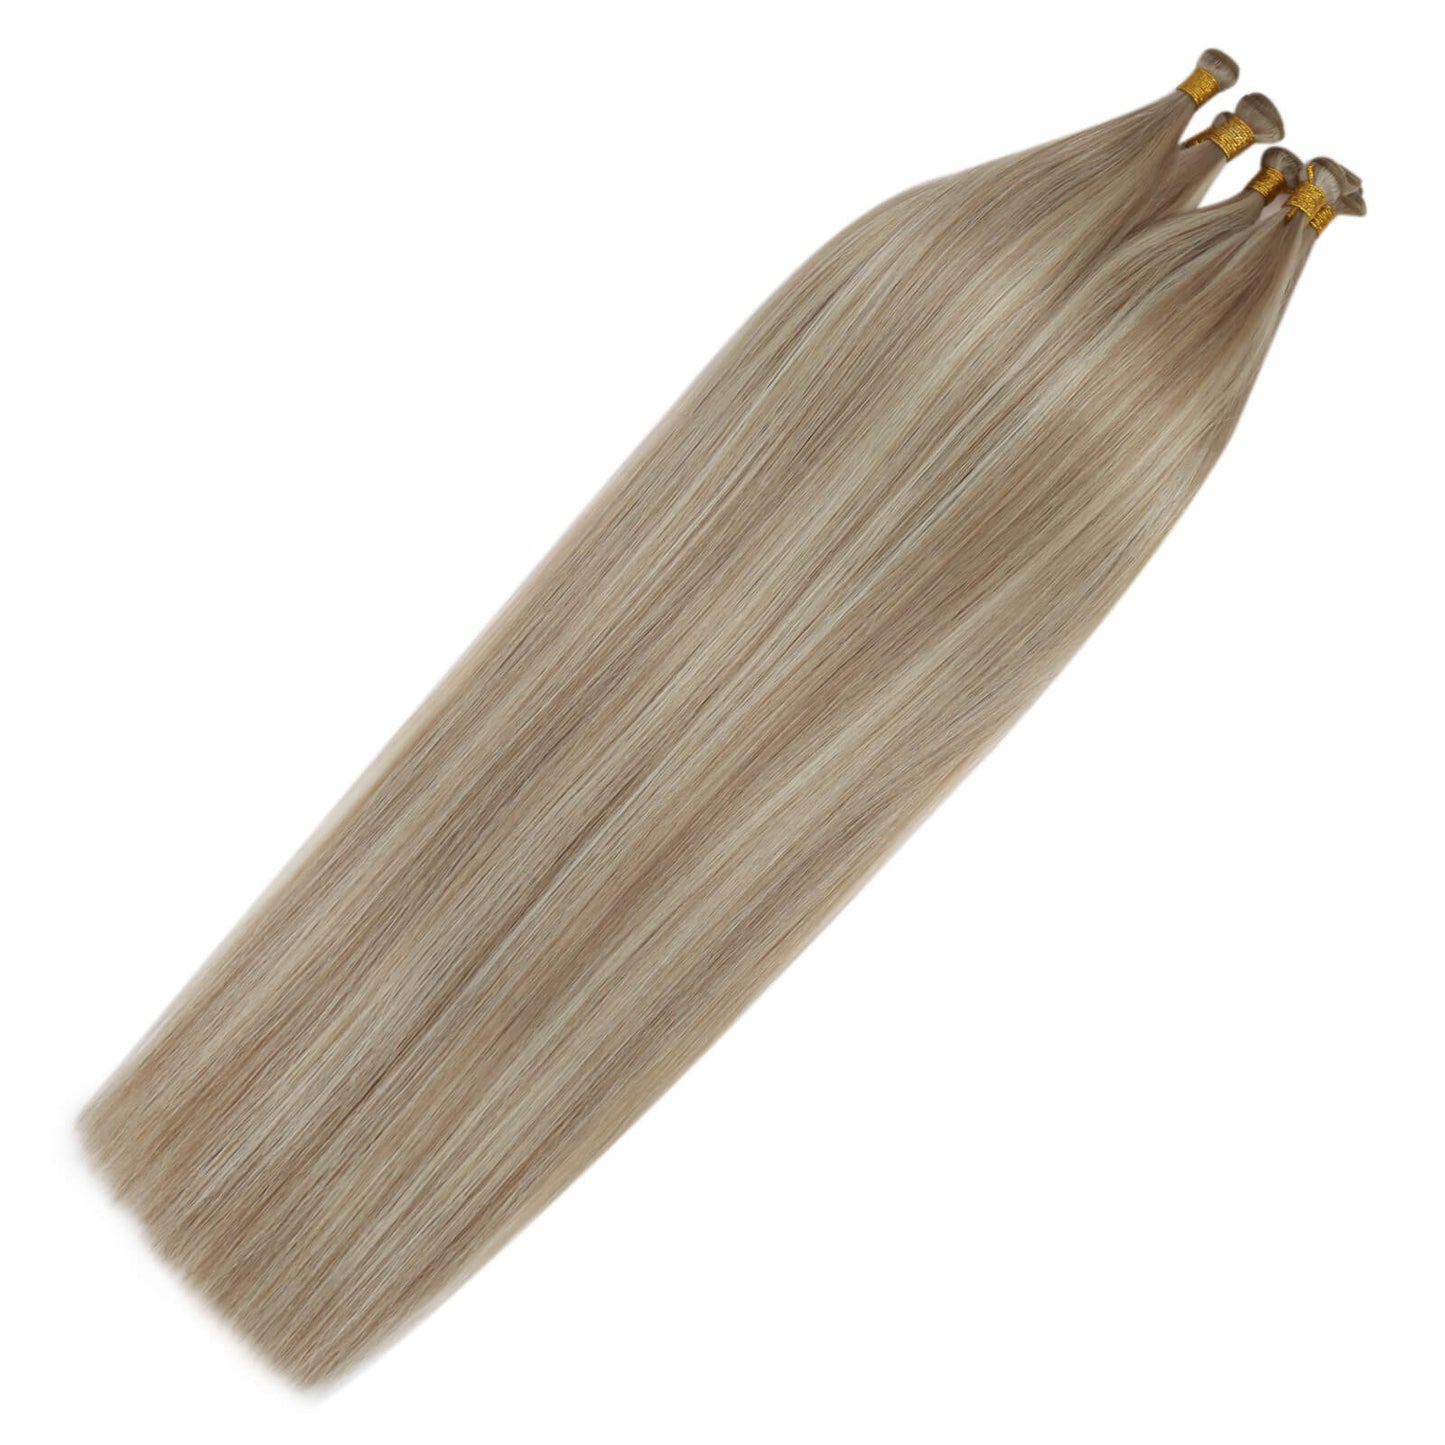 Highlight Genius Weft Hair Extensions Ash Blonde natural straight hair weave